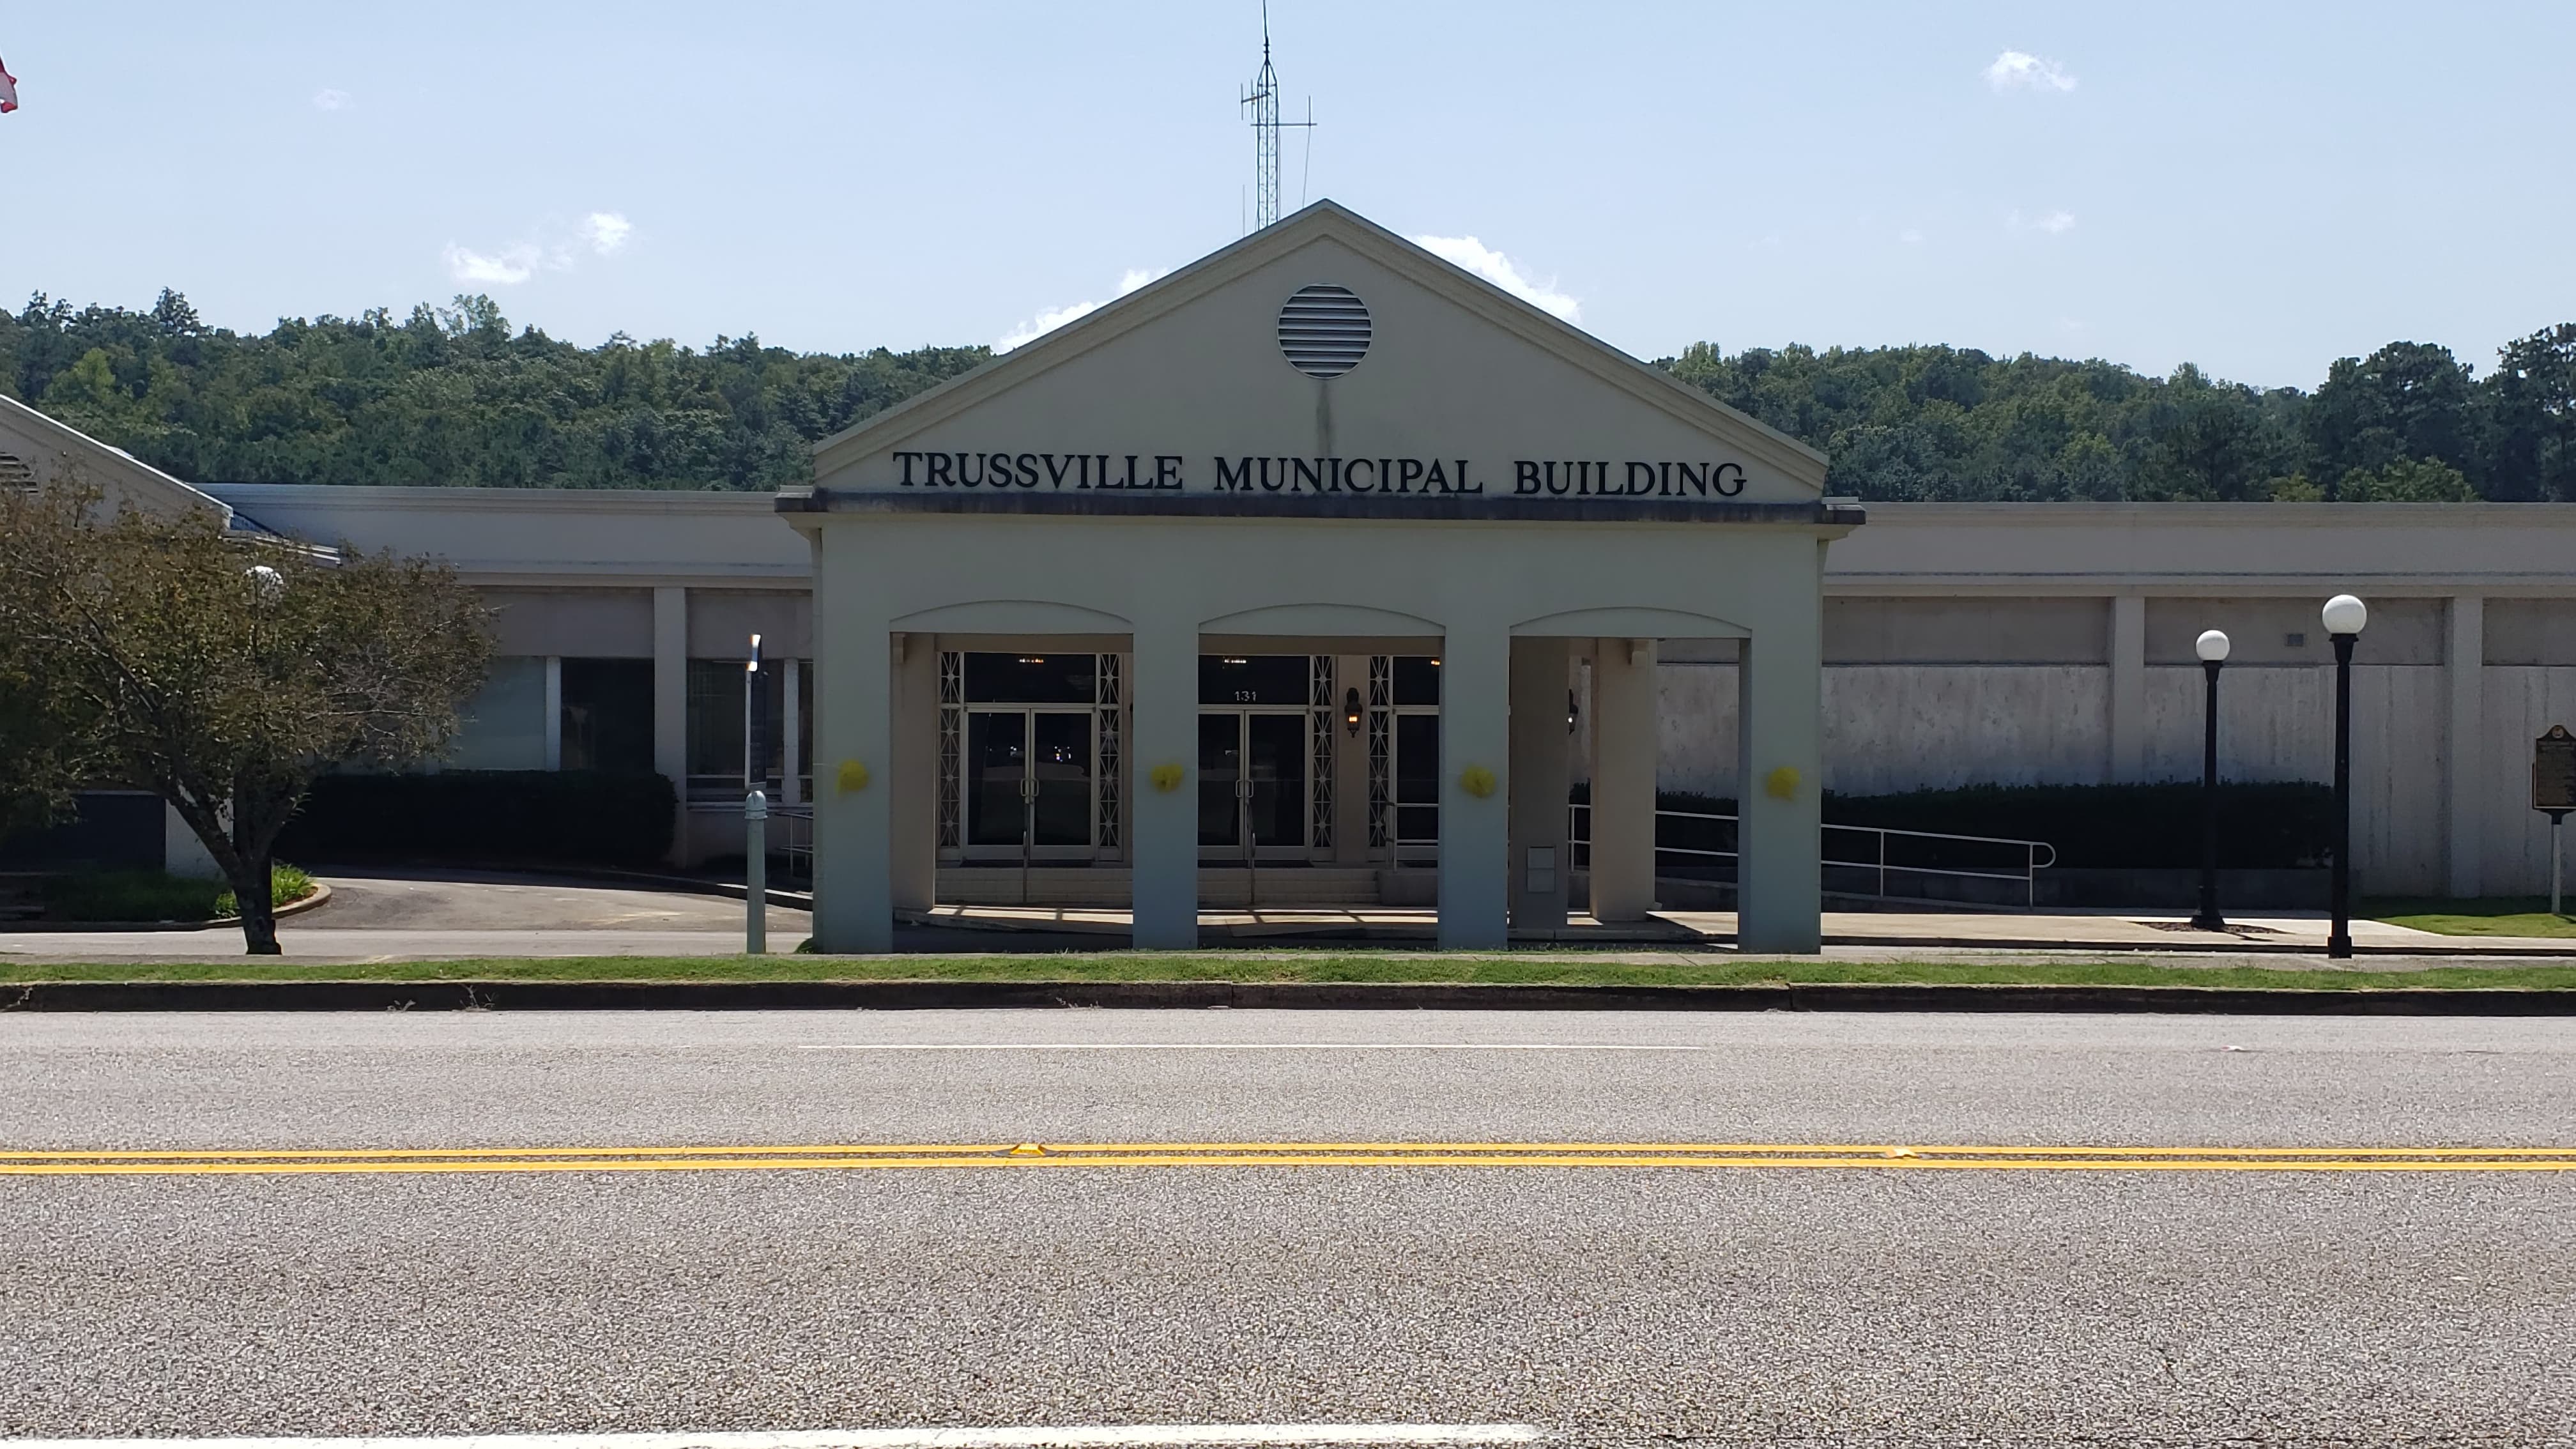 Trussville City offices and facilities to close Monday until further notice